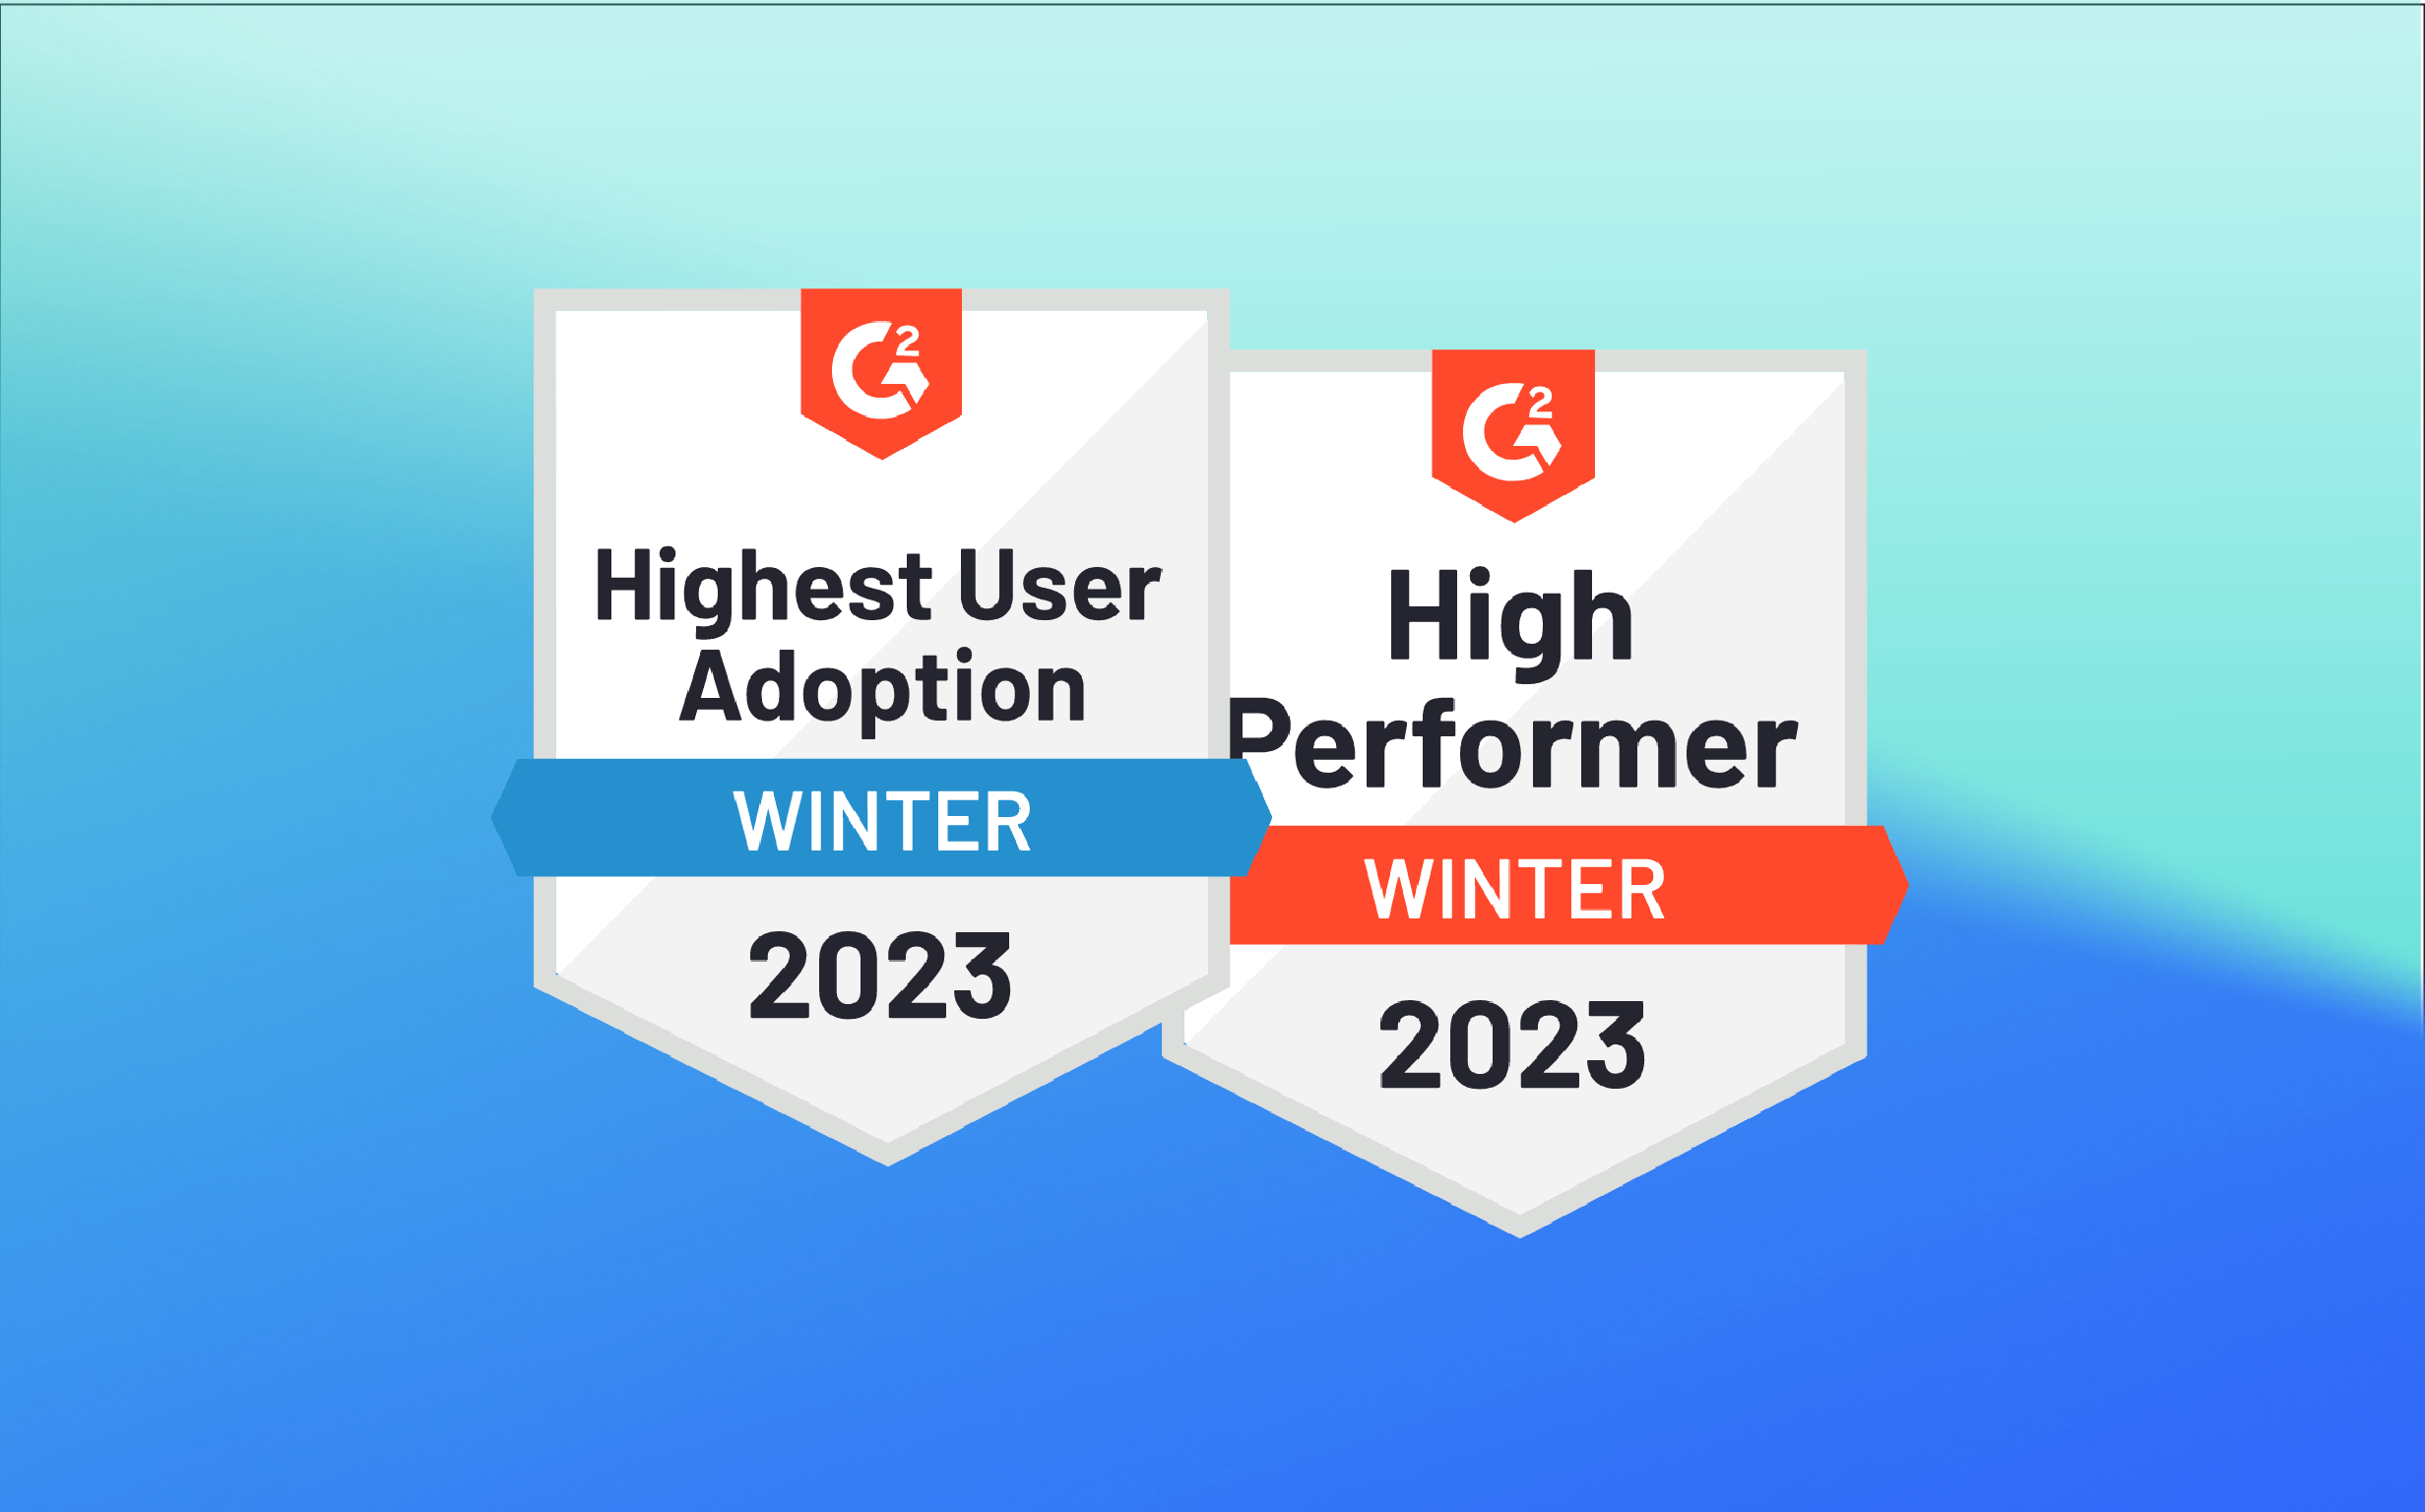 Airbrake Achieves Highest User Adoption in G2’s Winter 2023 Reports